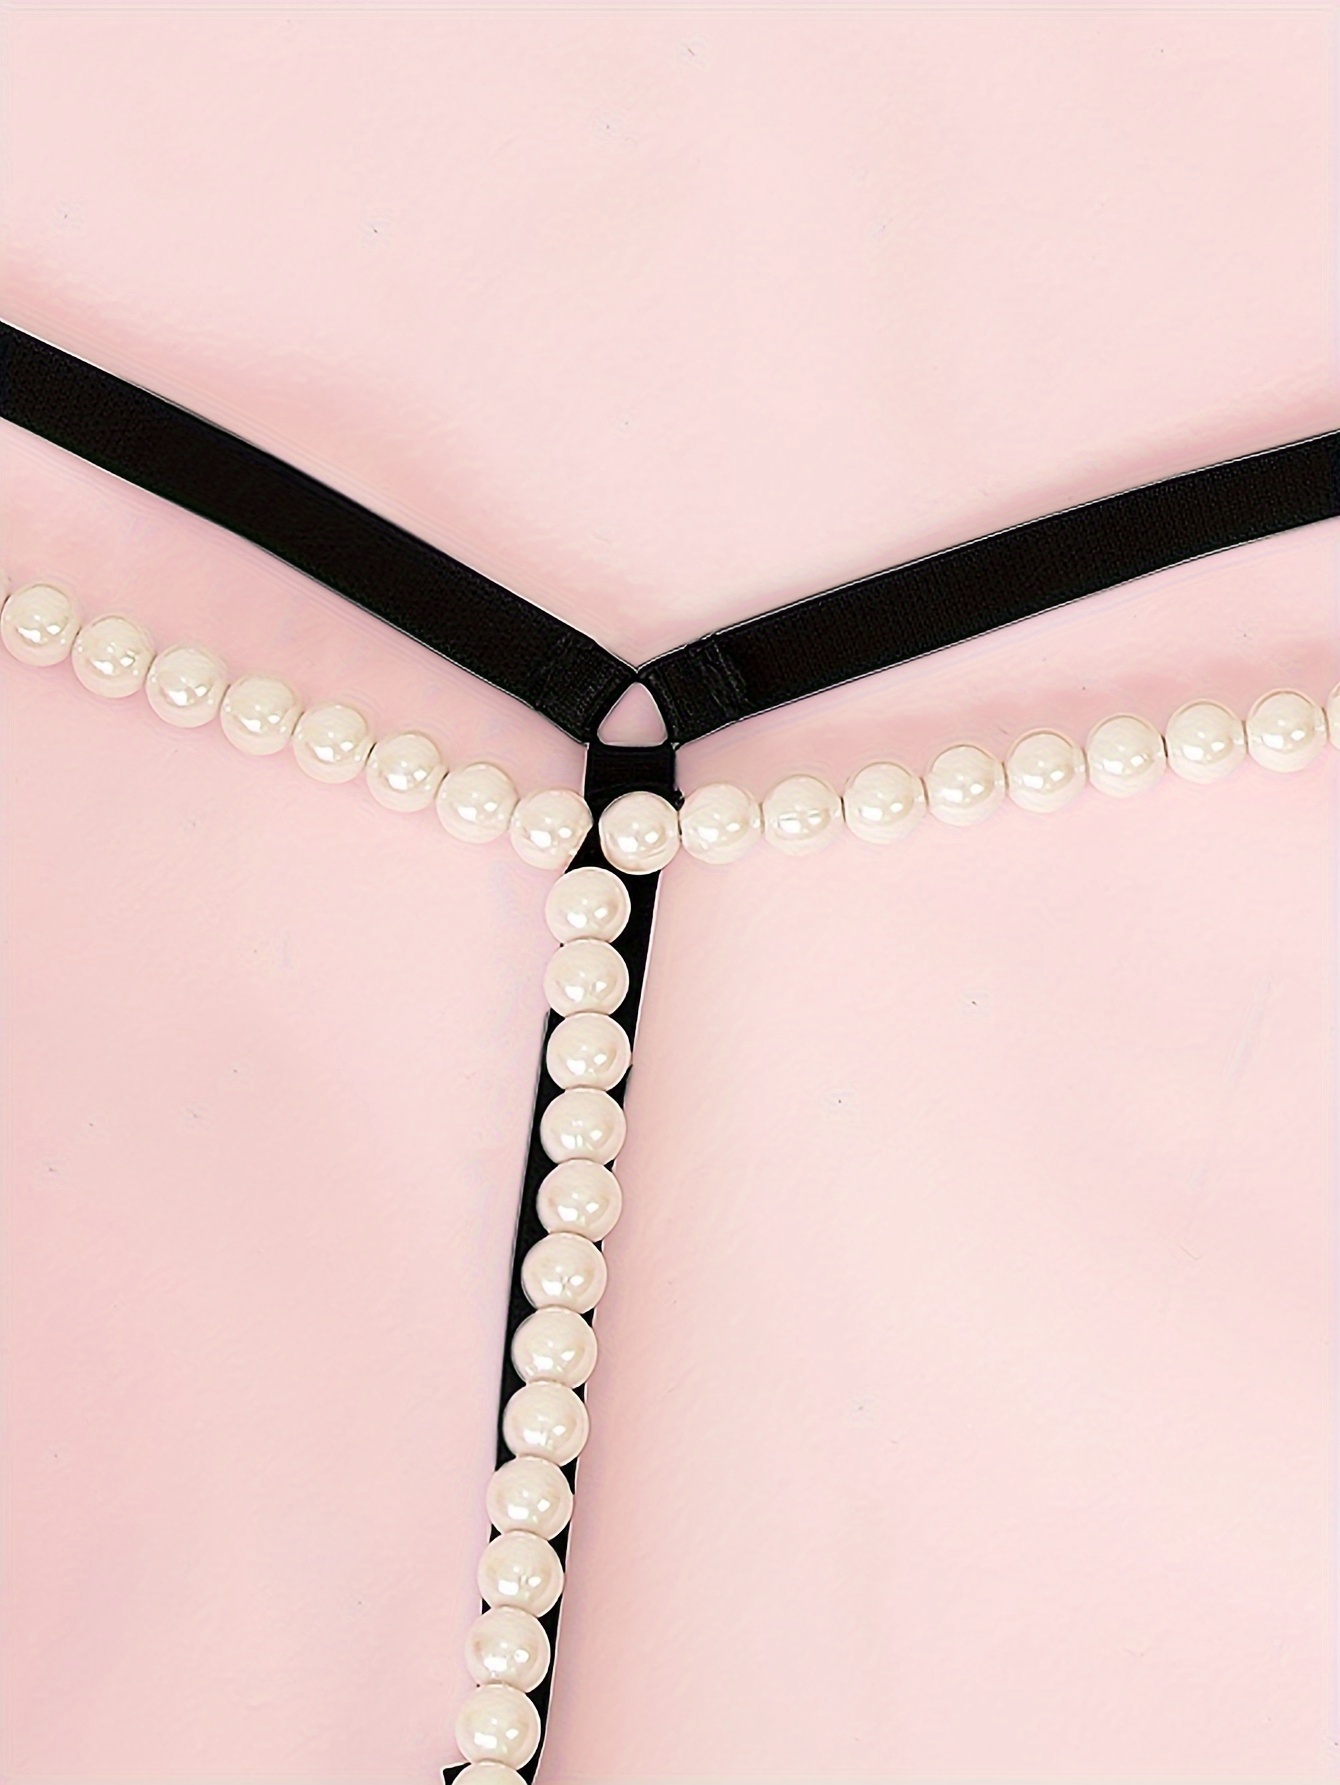 Bead Chain G-string, crotchless pearl panties, crotchless panties